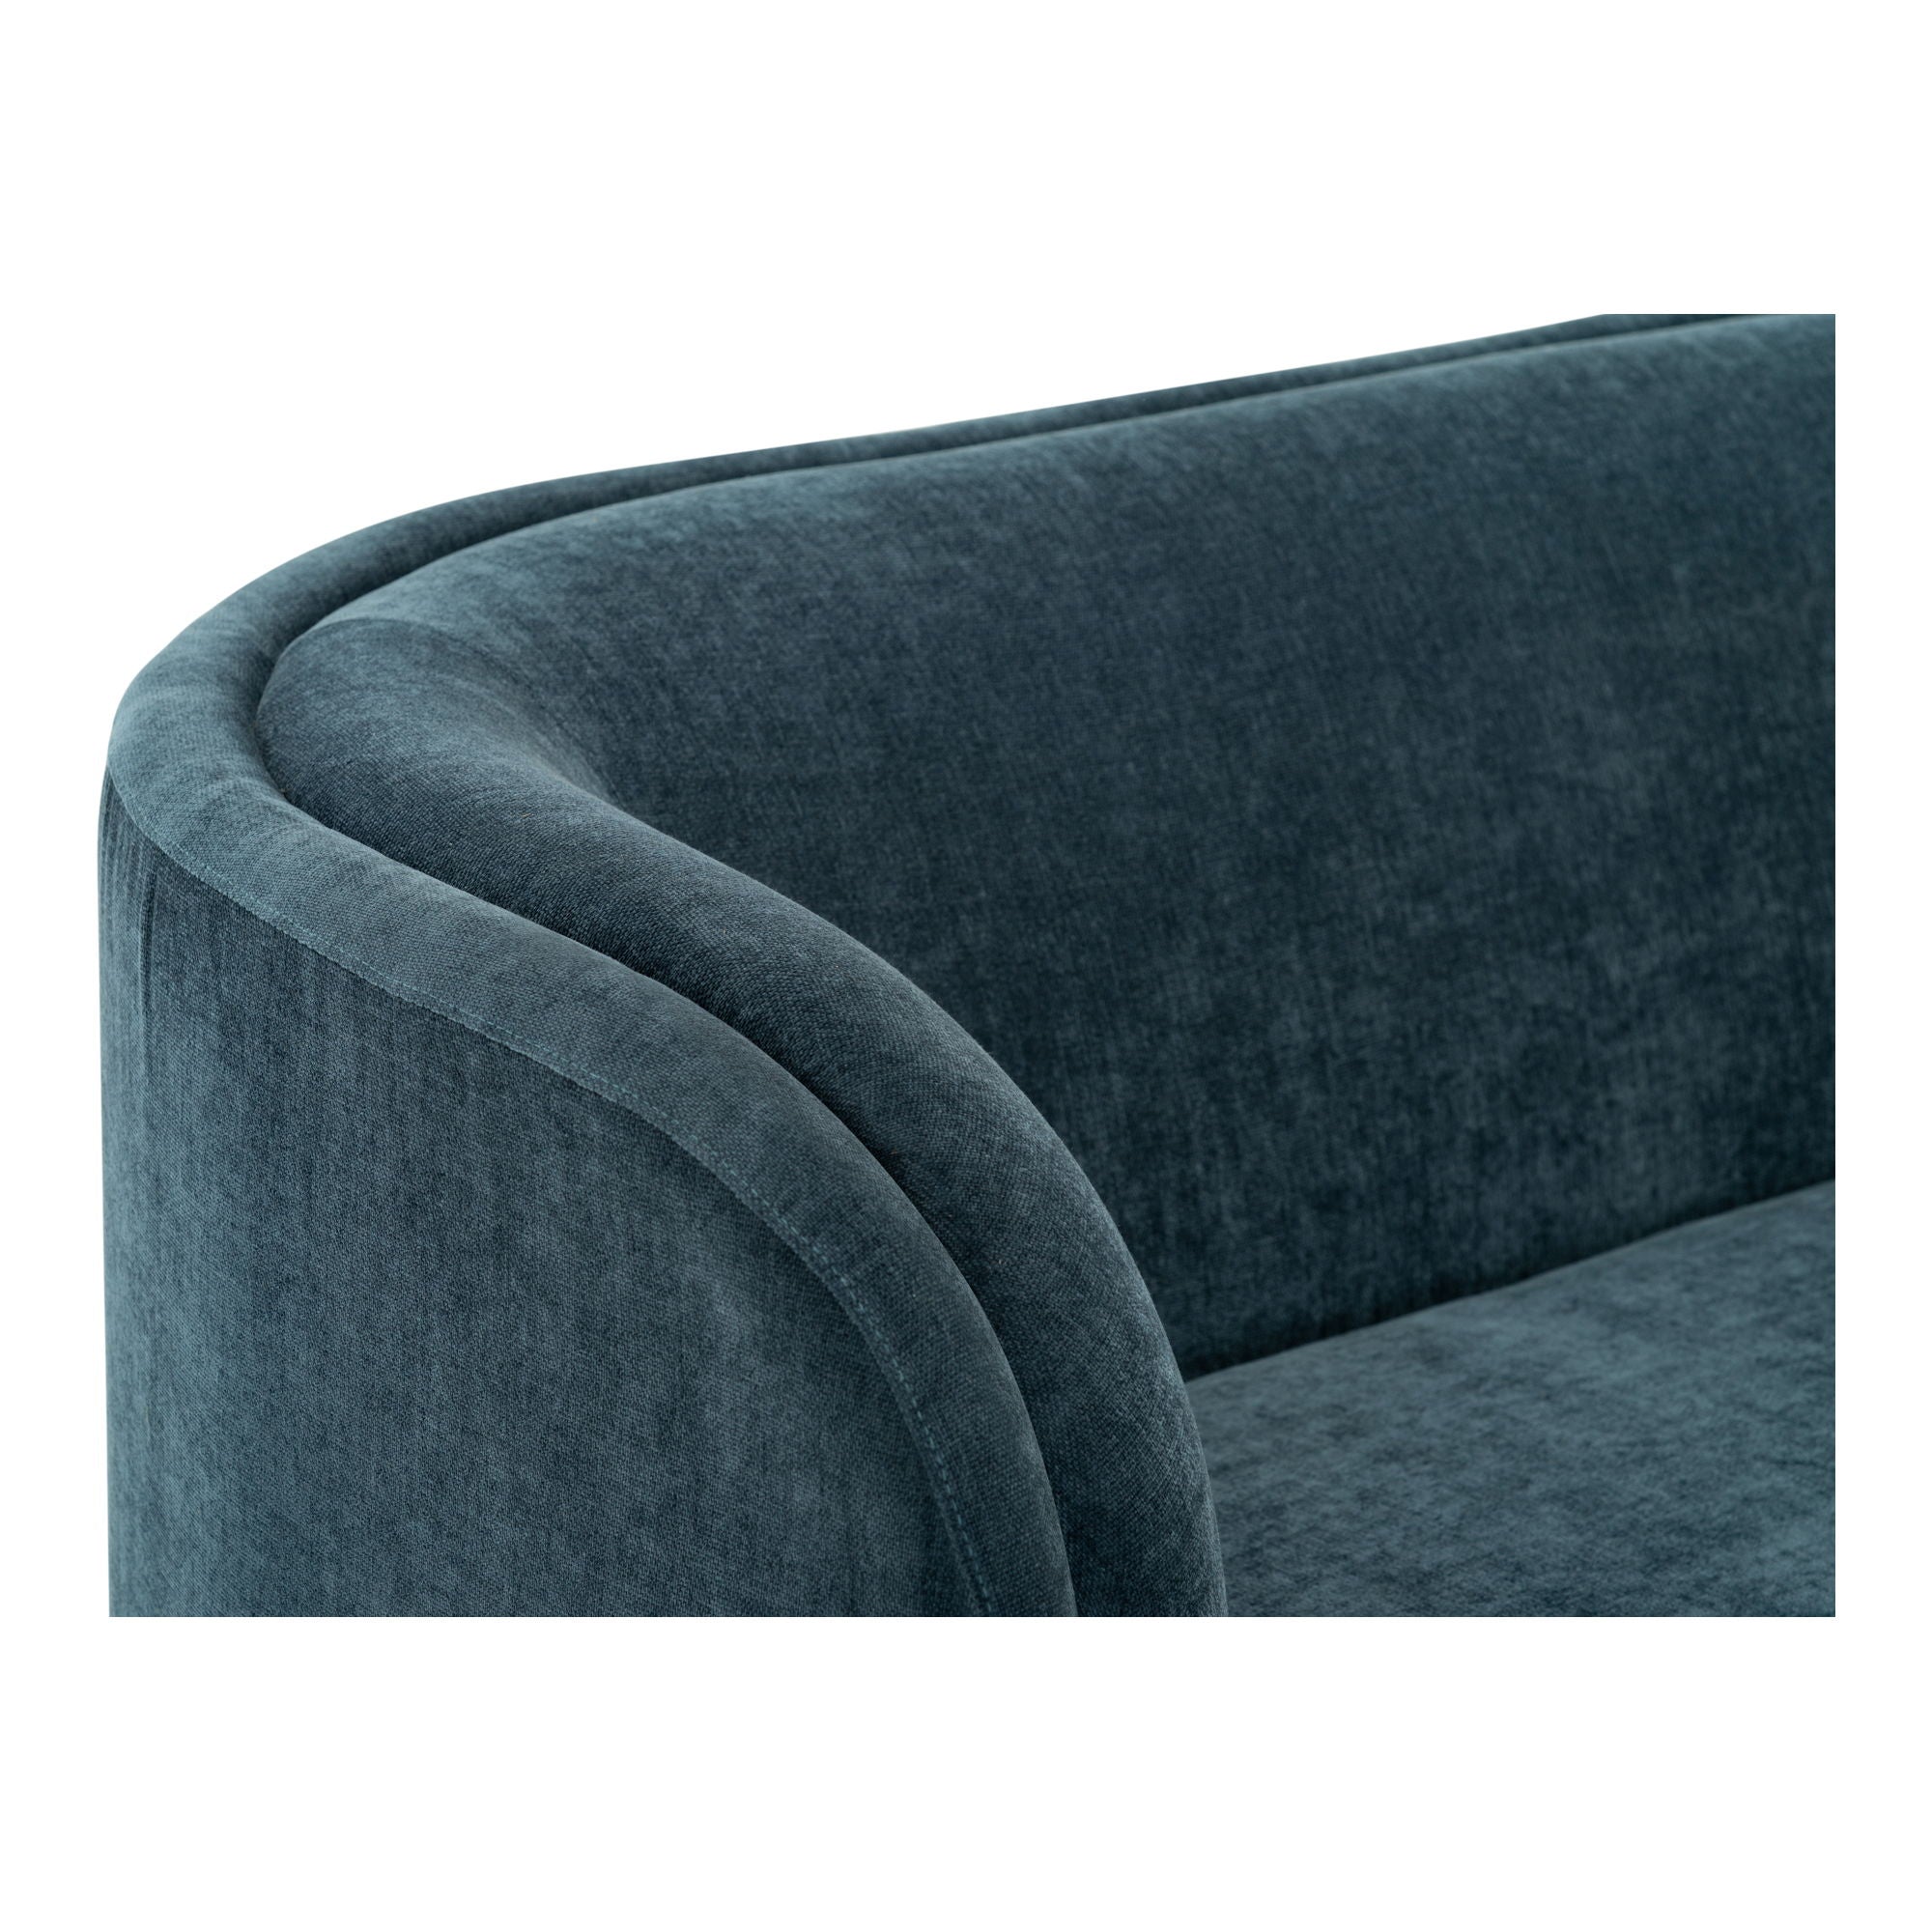 Yoon - Chaise Left Nightshade Blue - Blue